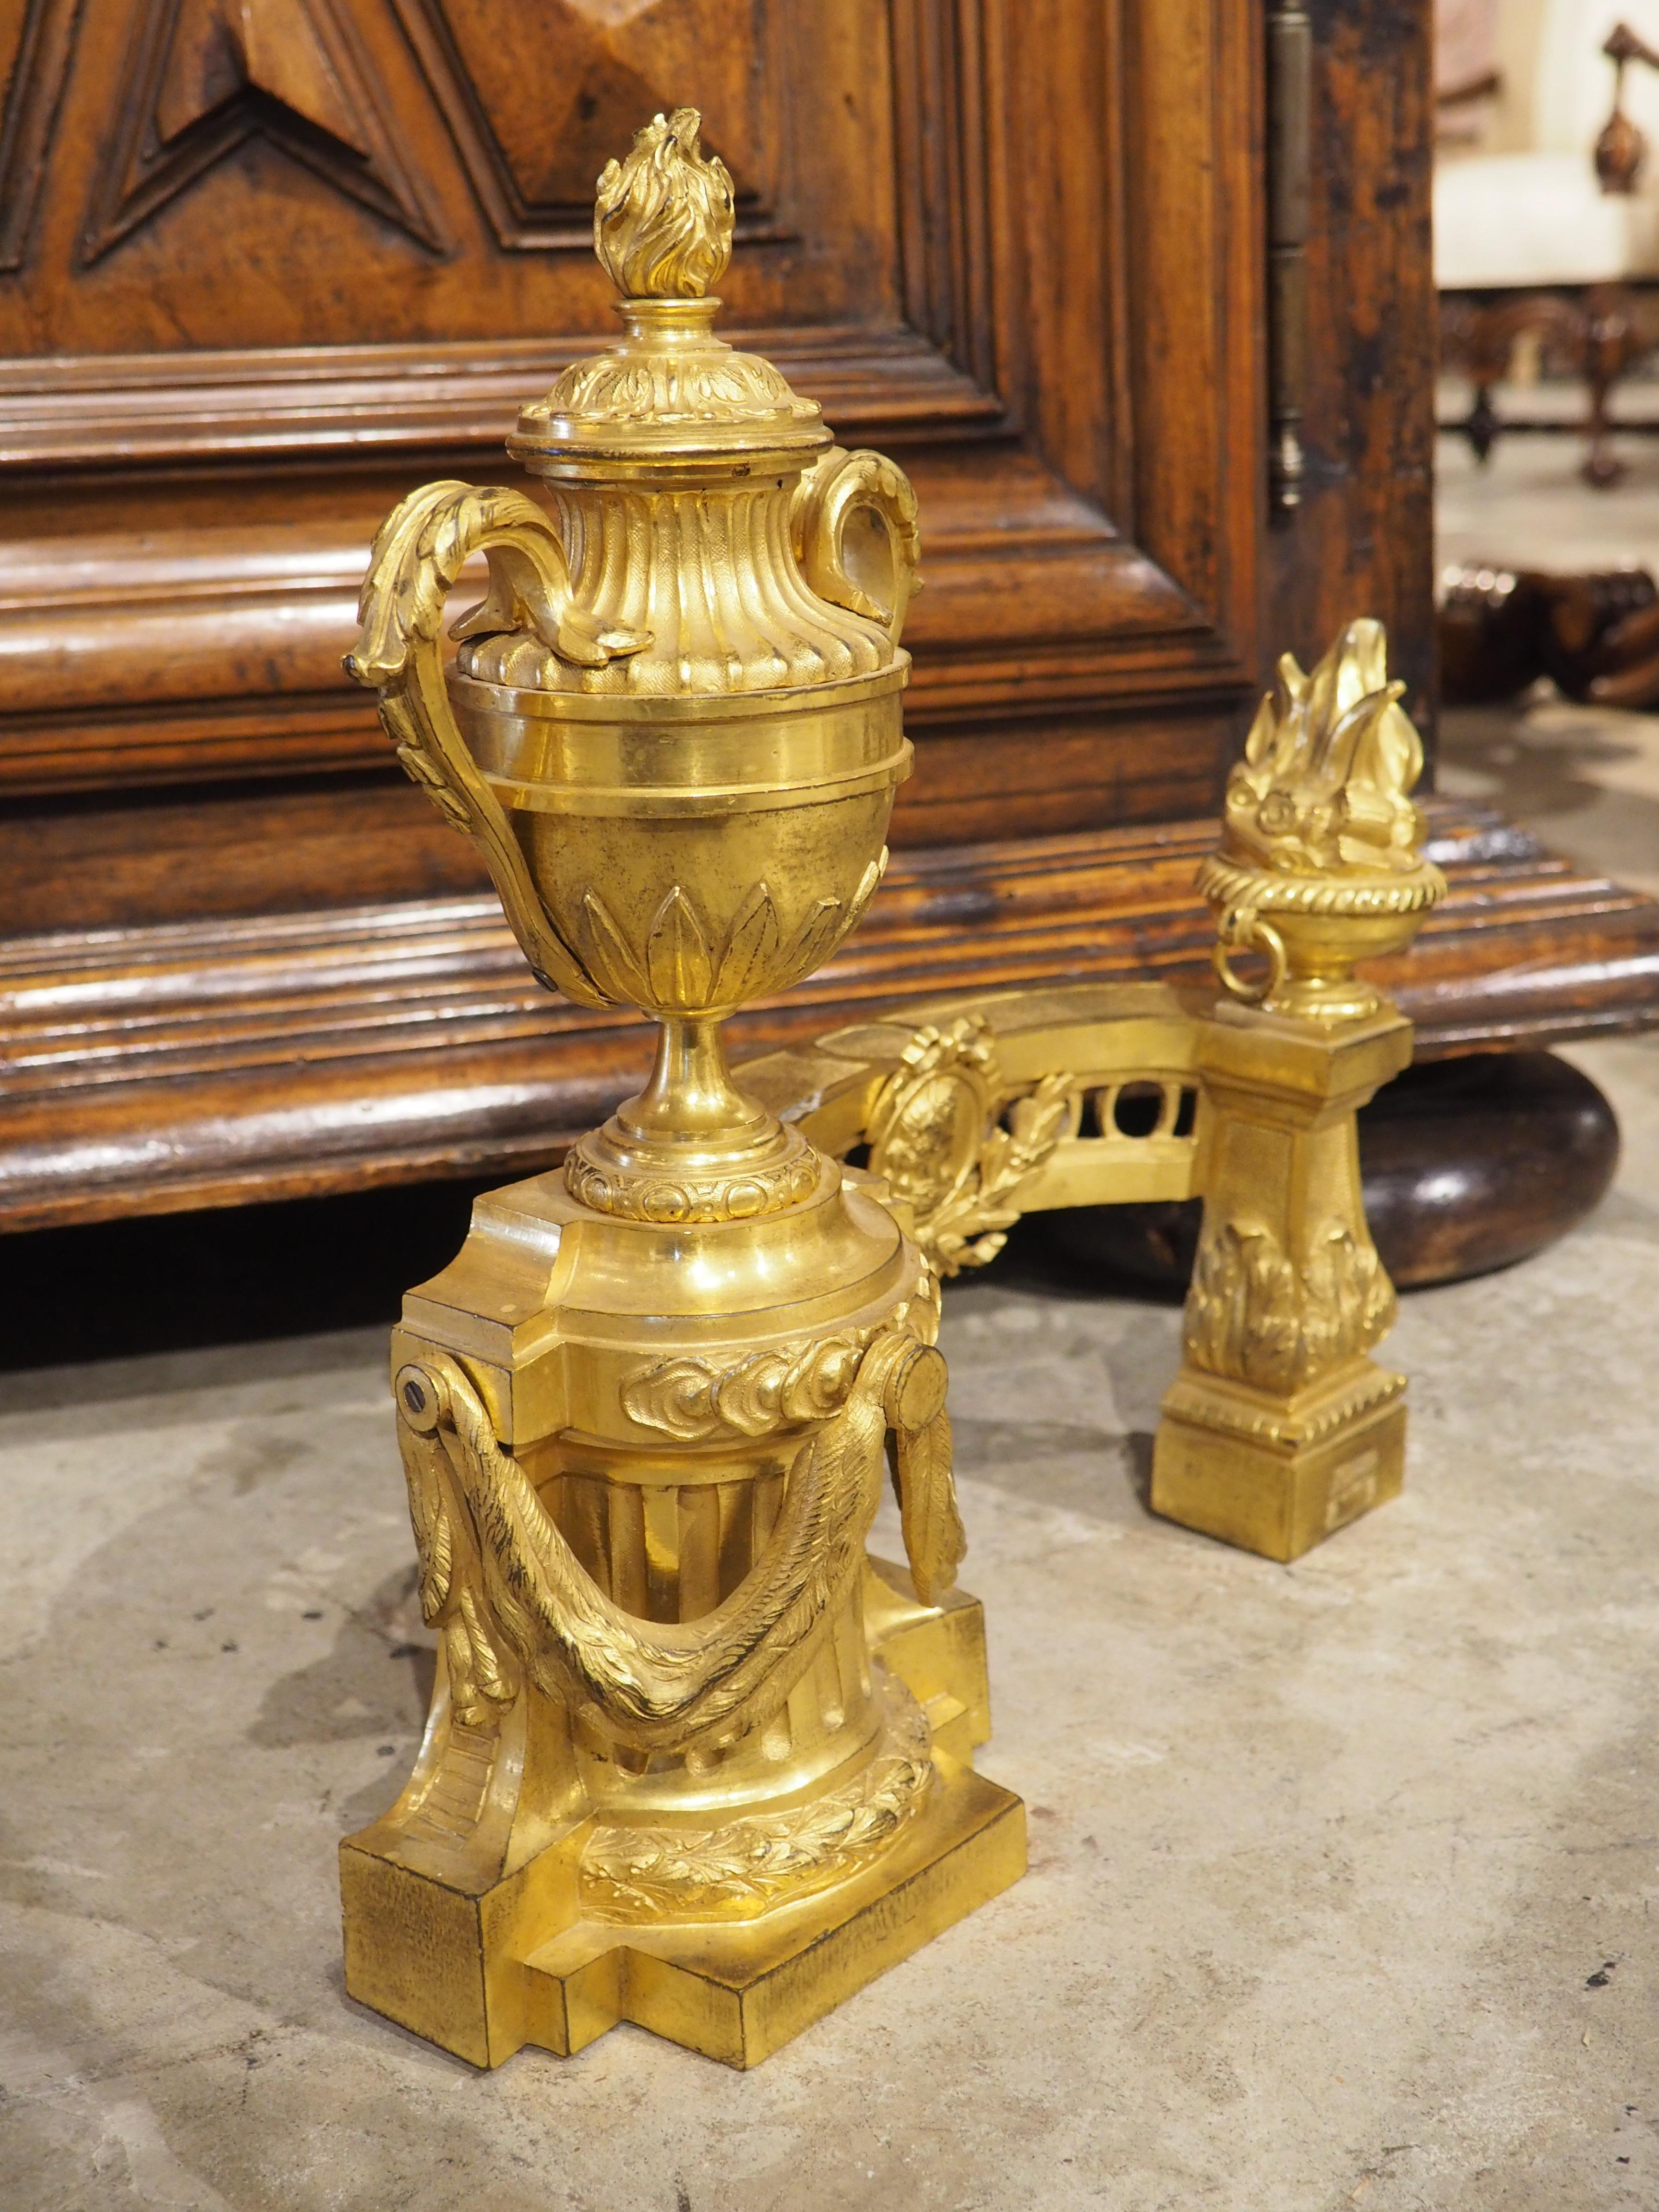 From France, circa 1850, this pair of bronze dore fireplace chenets are in the style of Louis XVI, as noted by the presence of multiple pots a feu finials. Chenets have been used for centuries to prevent burning logs from spilling out of the